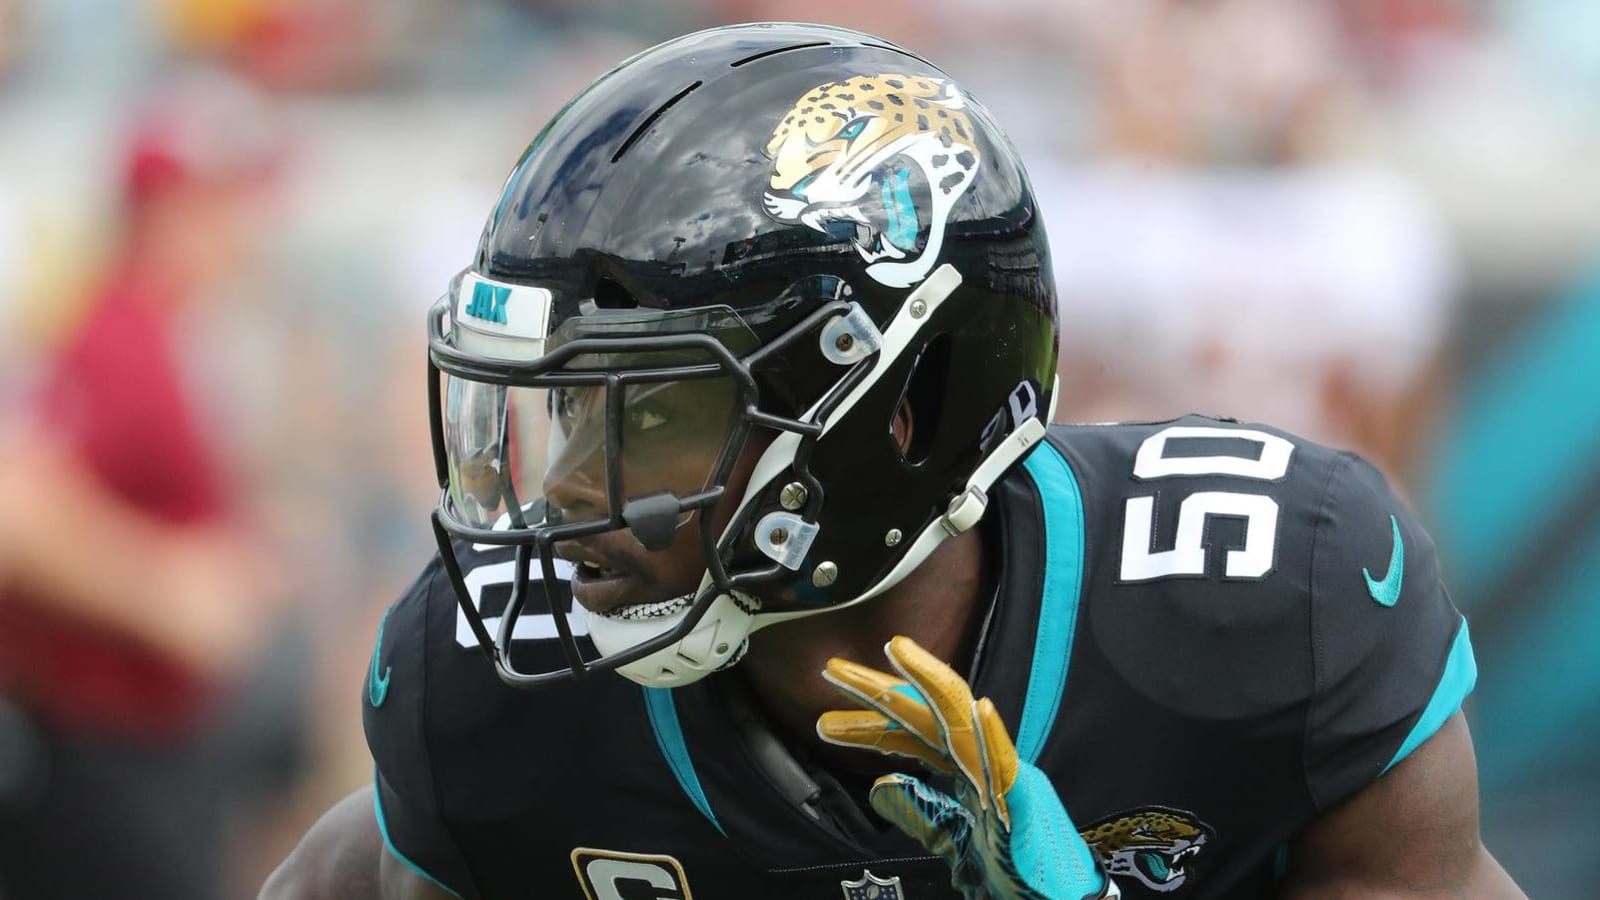 Former Jaguars LB Telvin Smith arrested, charged with unlawful sexual activity with minors